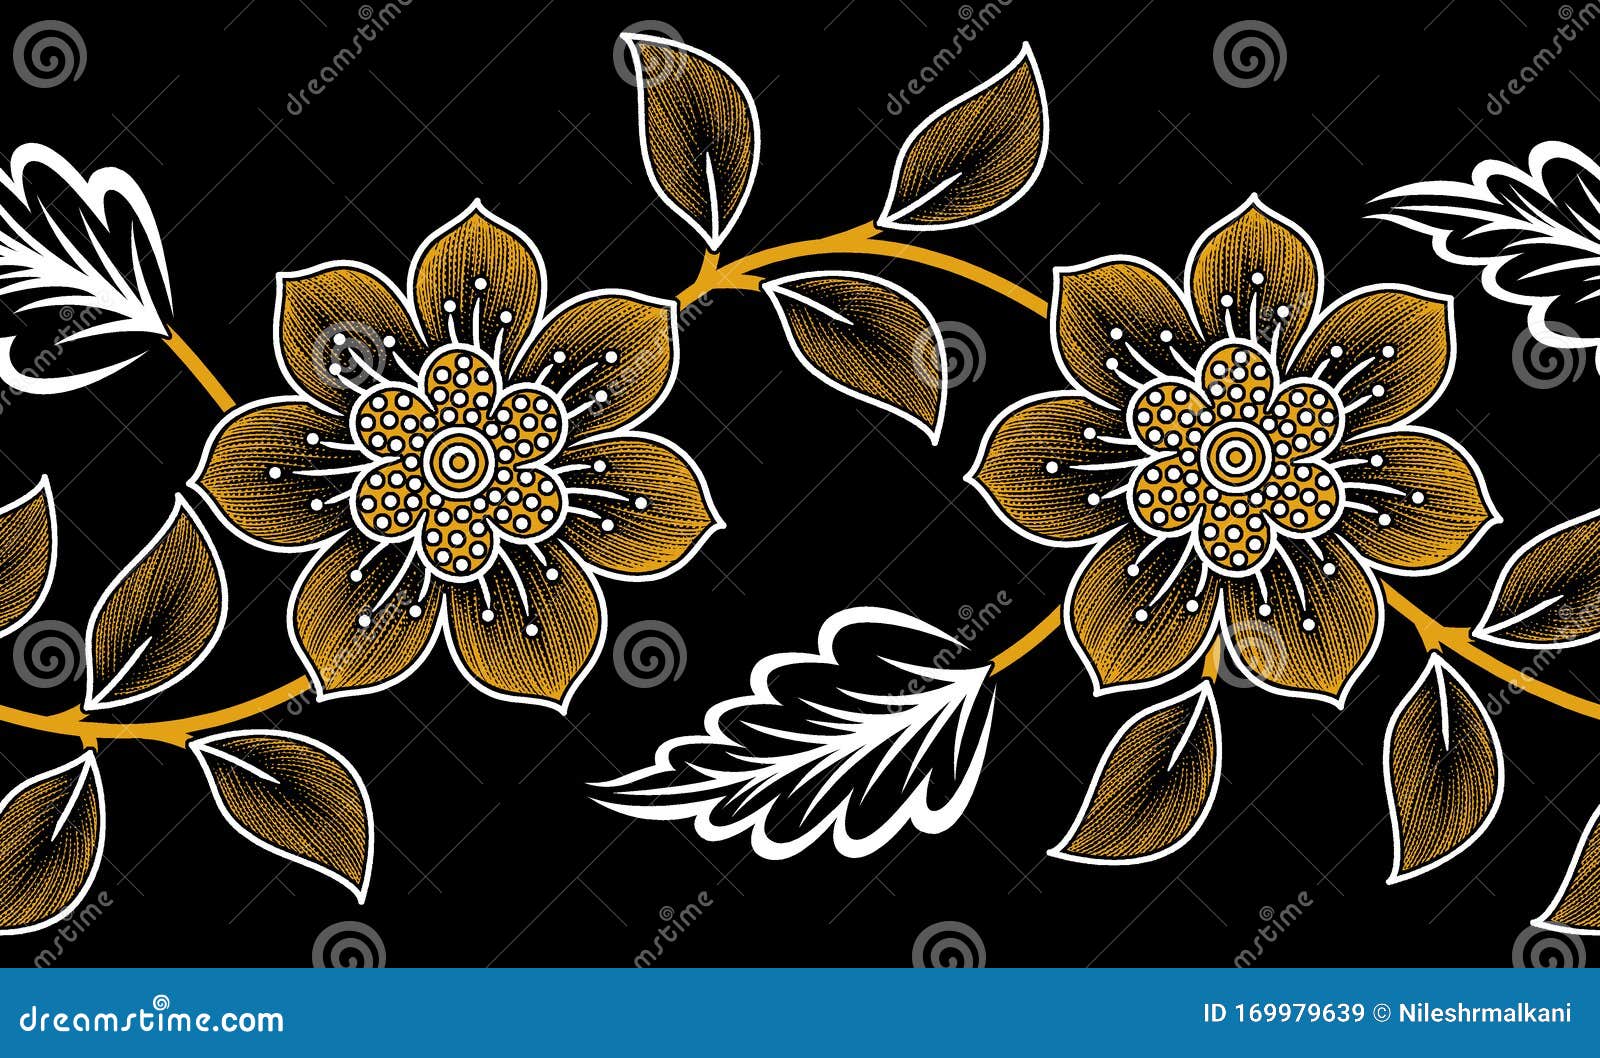 Wallpapers with floral and Asian and Far Eastern designs